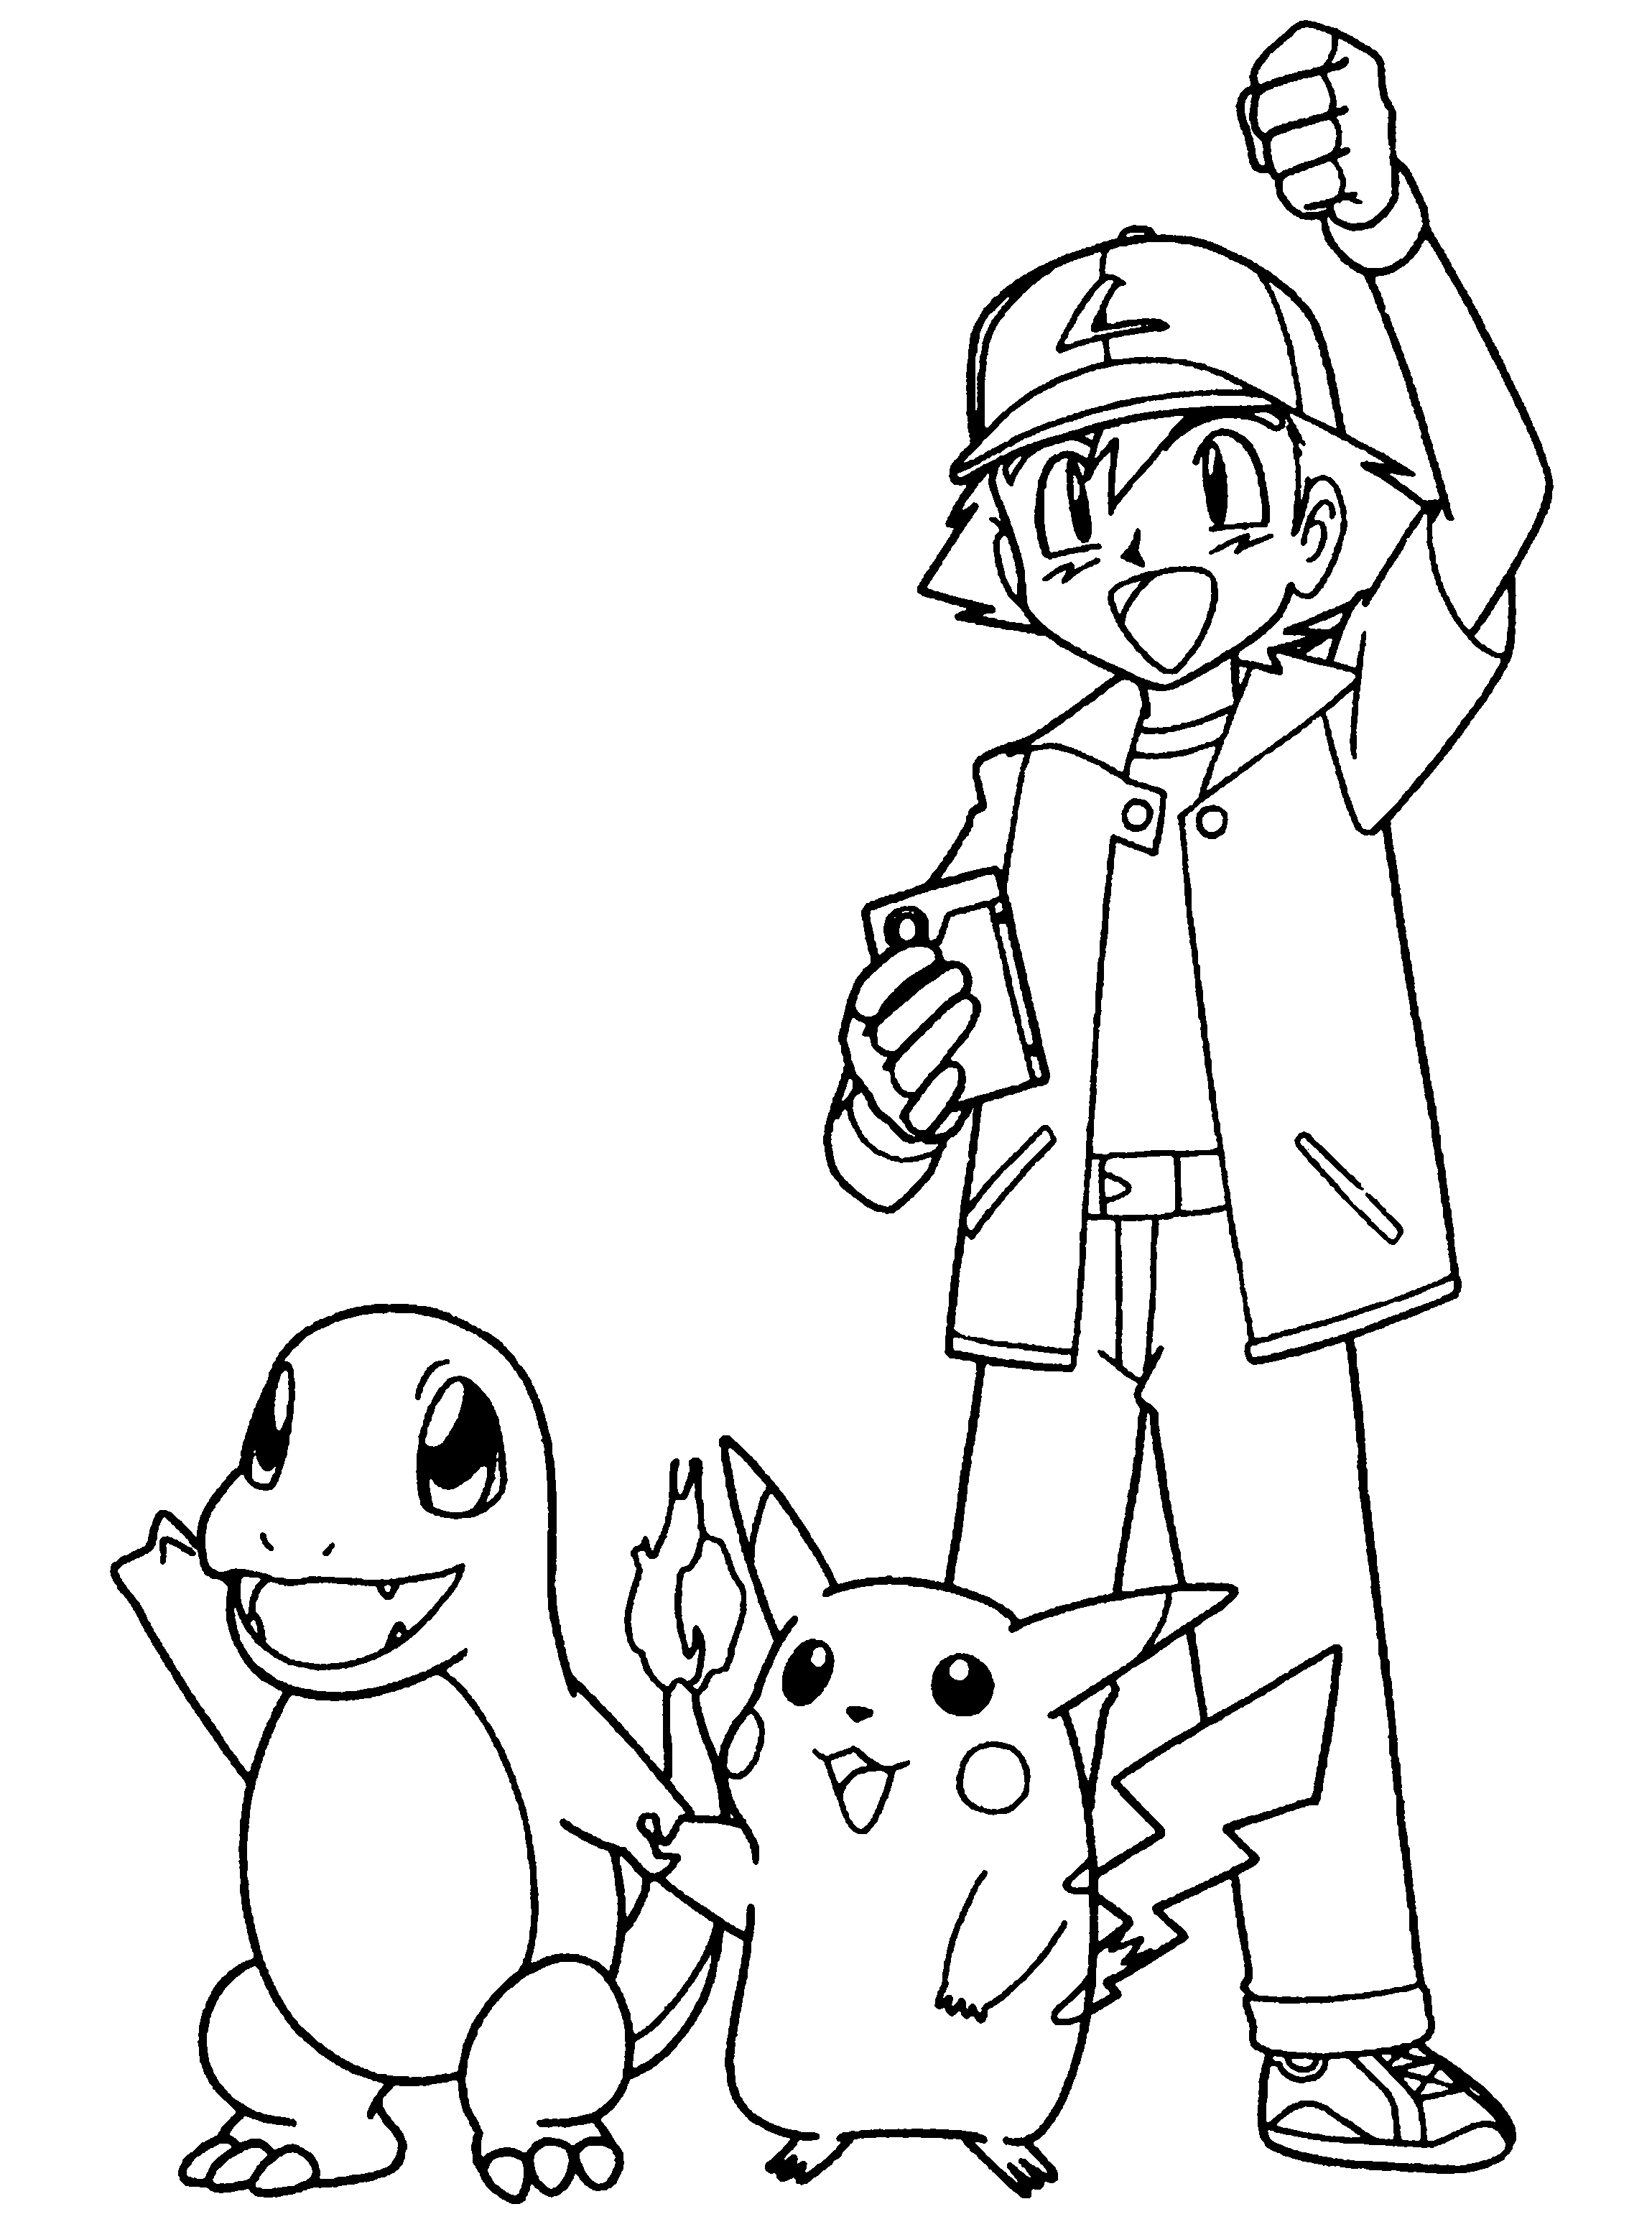 pokemon-coloring-pages